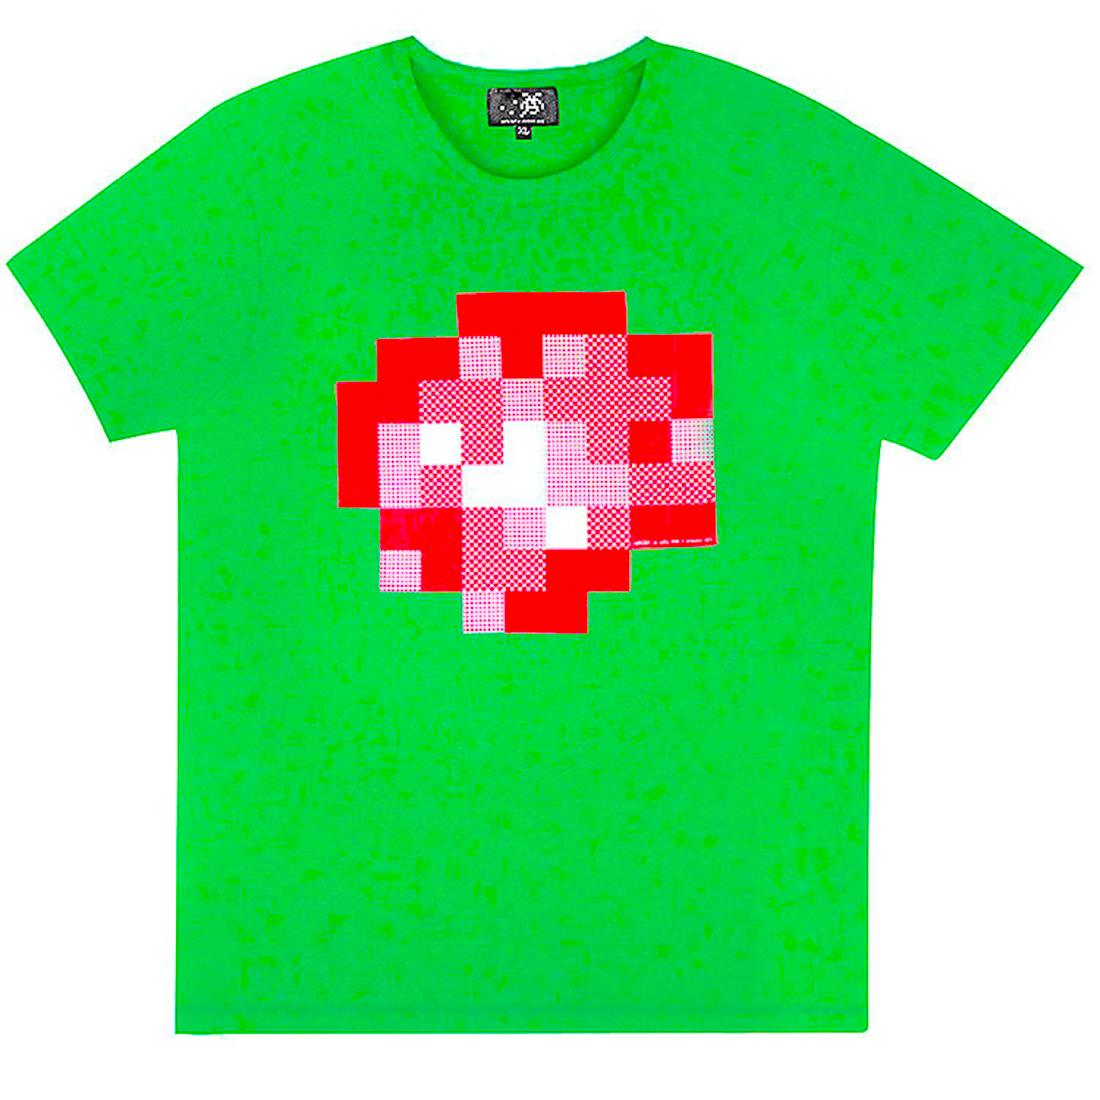 INVADER Wipe Out T-shirt (Green Extra Large) - Street Art Art by Invader